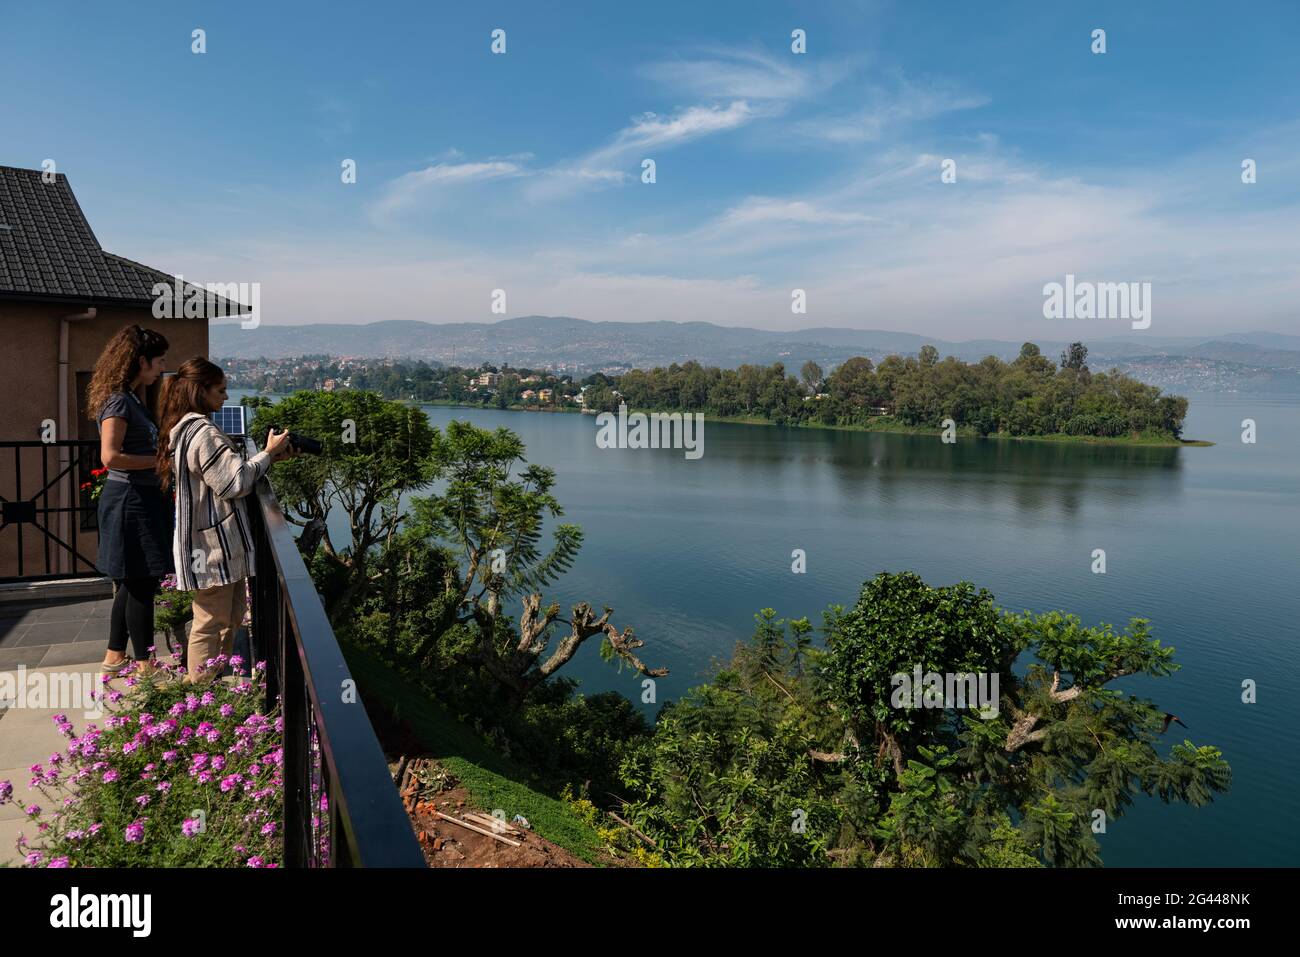 Young women overlook Lake Kivu from the terrace of the Emeraude Kivu Resort with the town of Bukavu in the Democratic Republic of the Congo in the dis Stock Photo